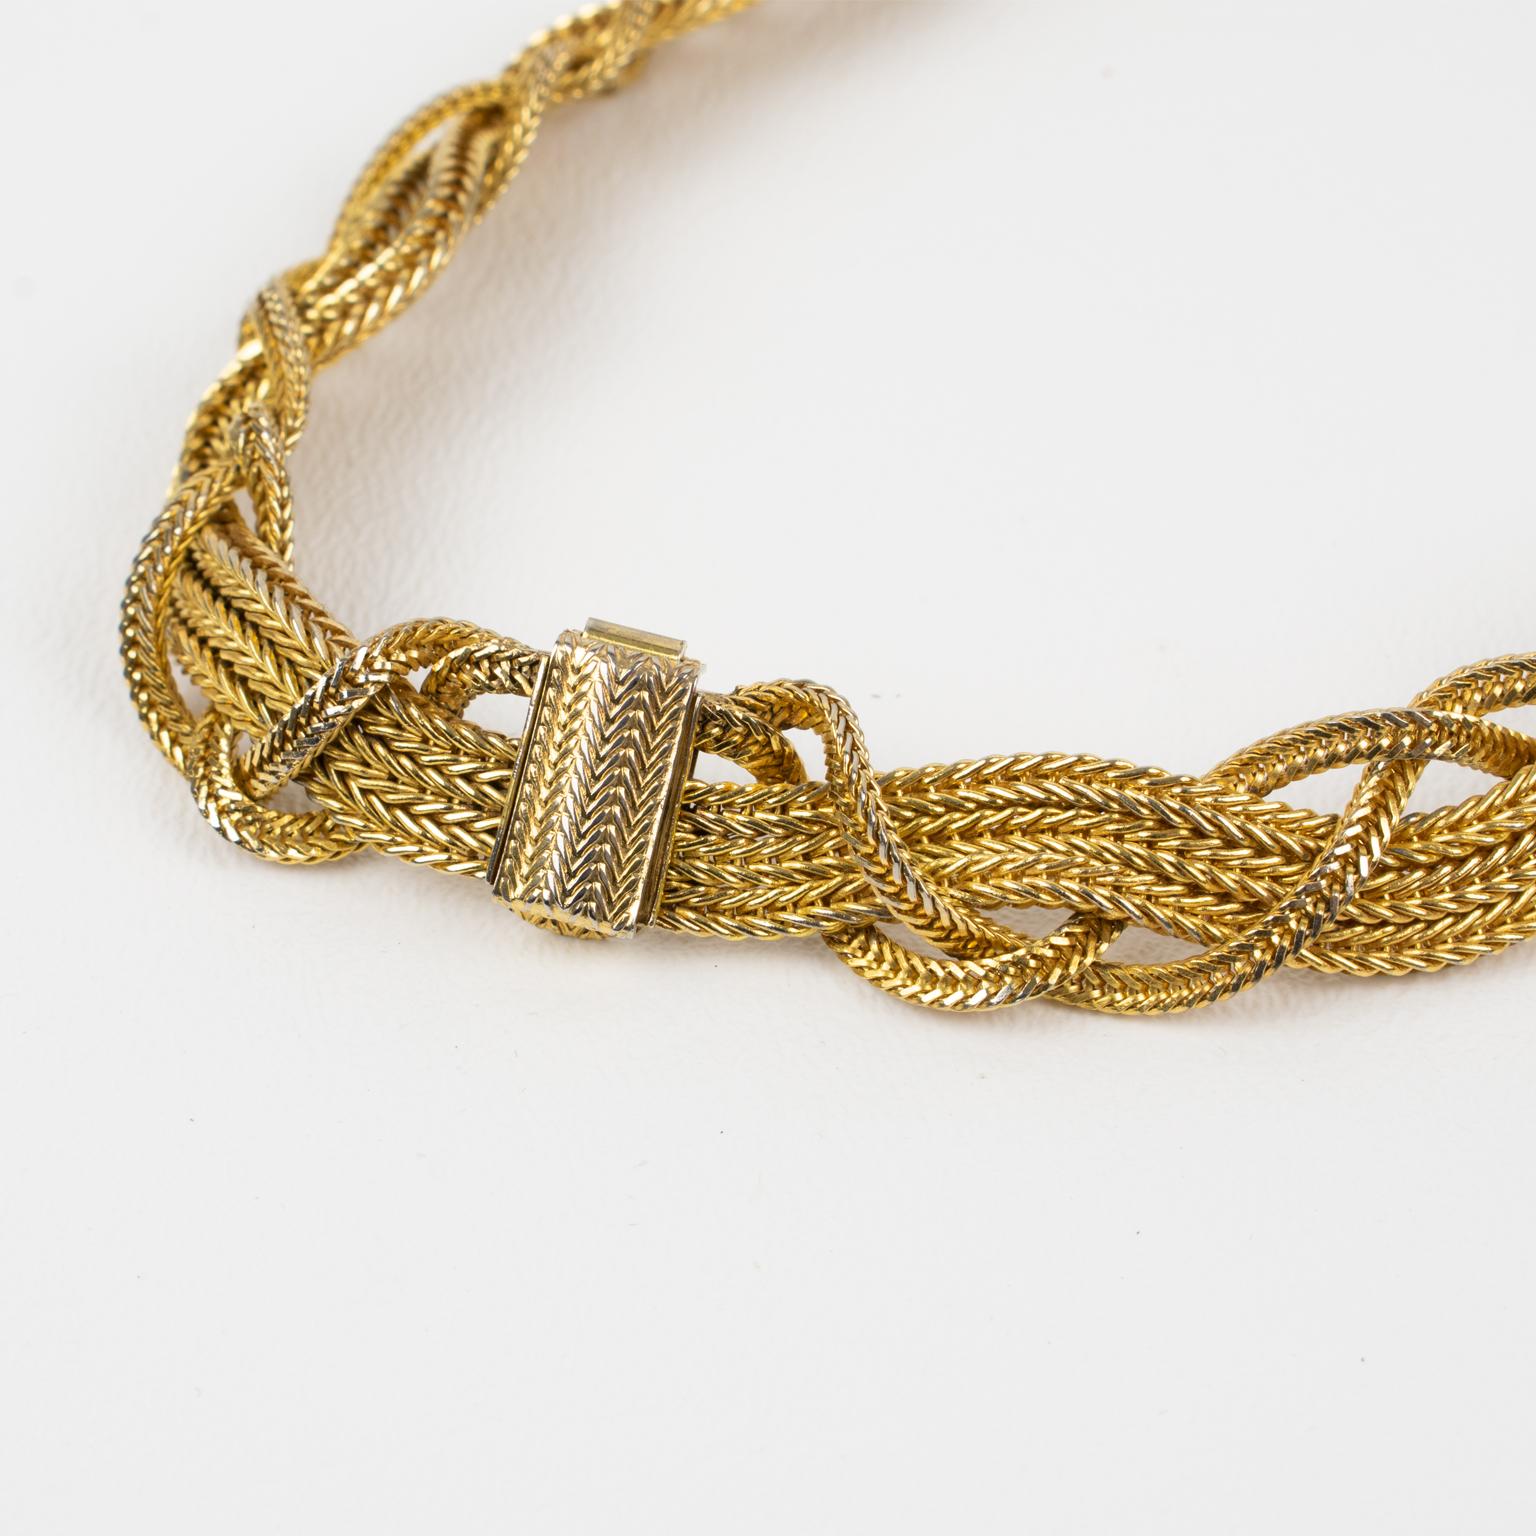 Christian Dior by Grosse 1958 Gilded Metal Braided Choker Necklace For Sale 1